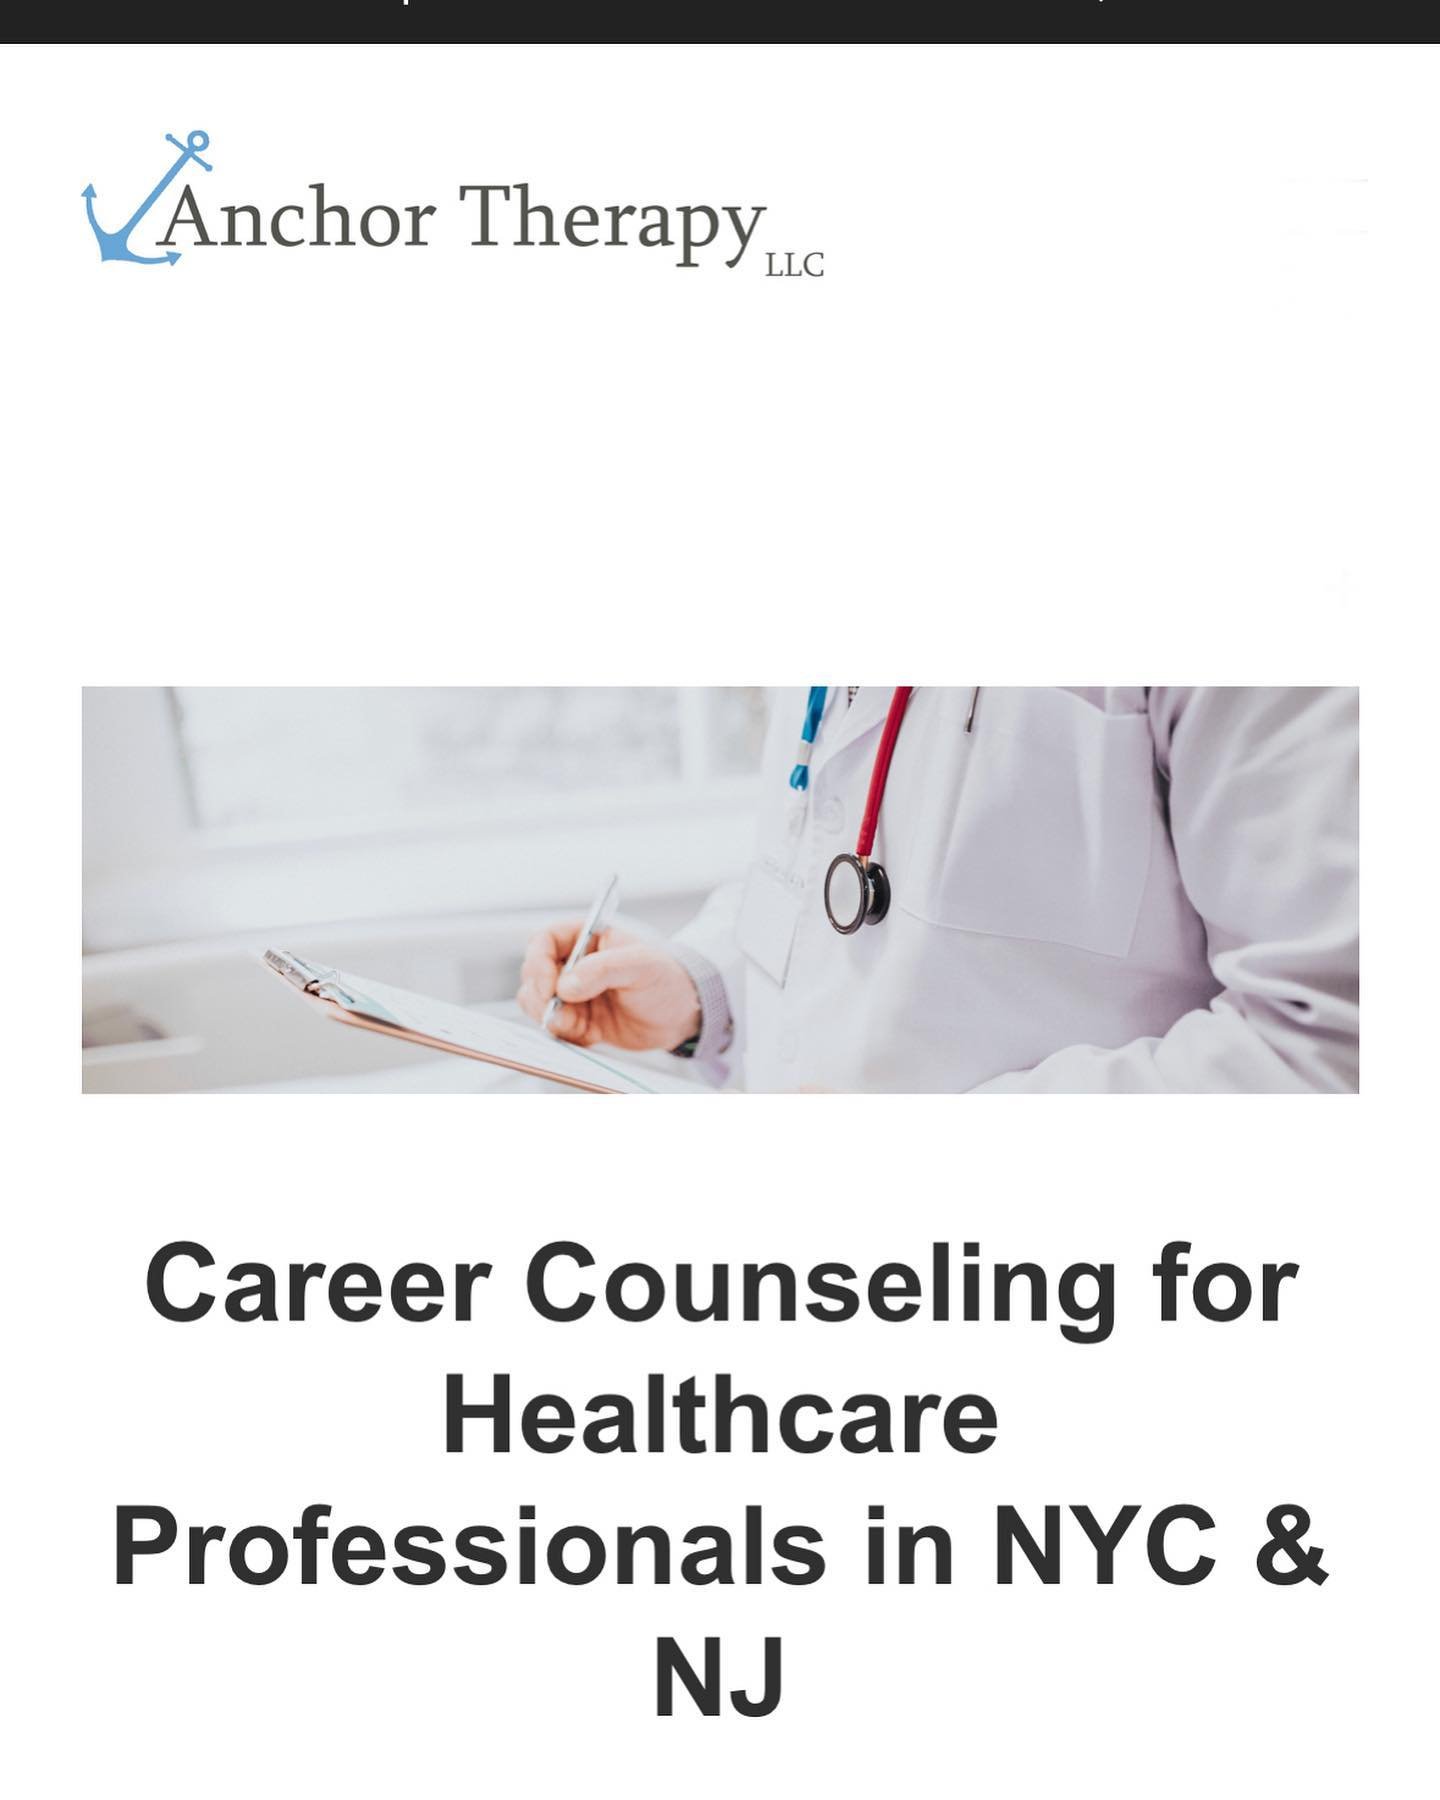 At Anchor Therapy, we offer career counseling for healthcare professionals. Career counseling for healthcare professionals, especially those in mental health fields, encompasses several key components to support their professional growth and well-bei